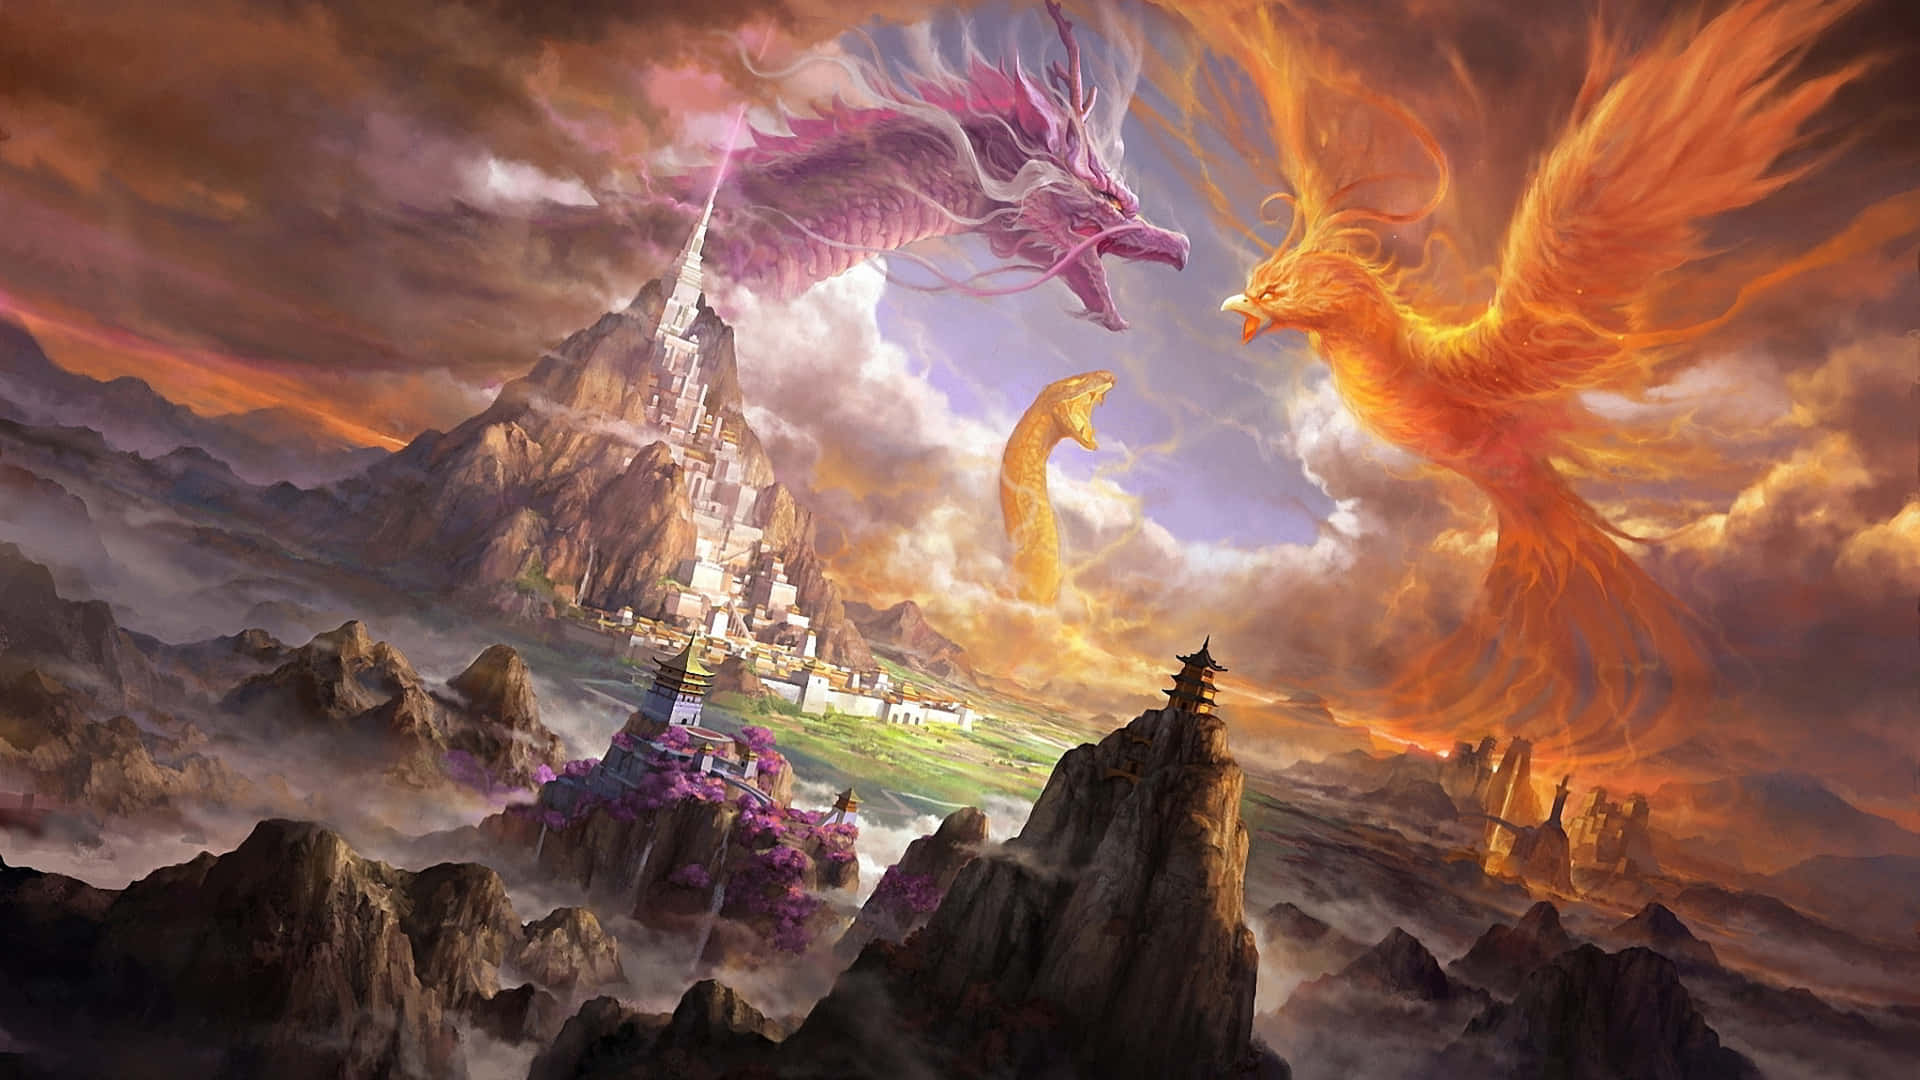 Fire-breathing Epic Dragon atop a Magical Castle Wallpaper